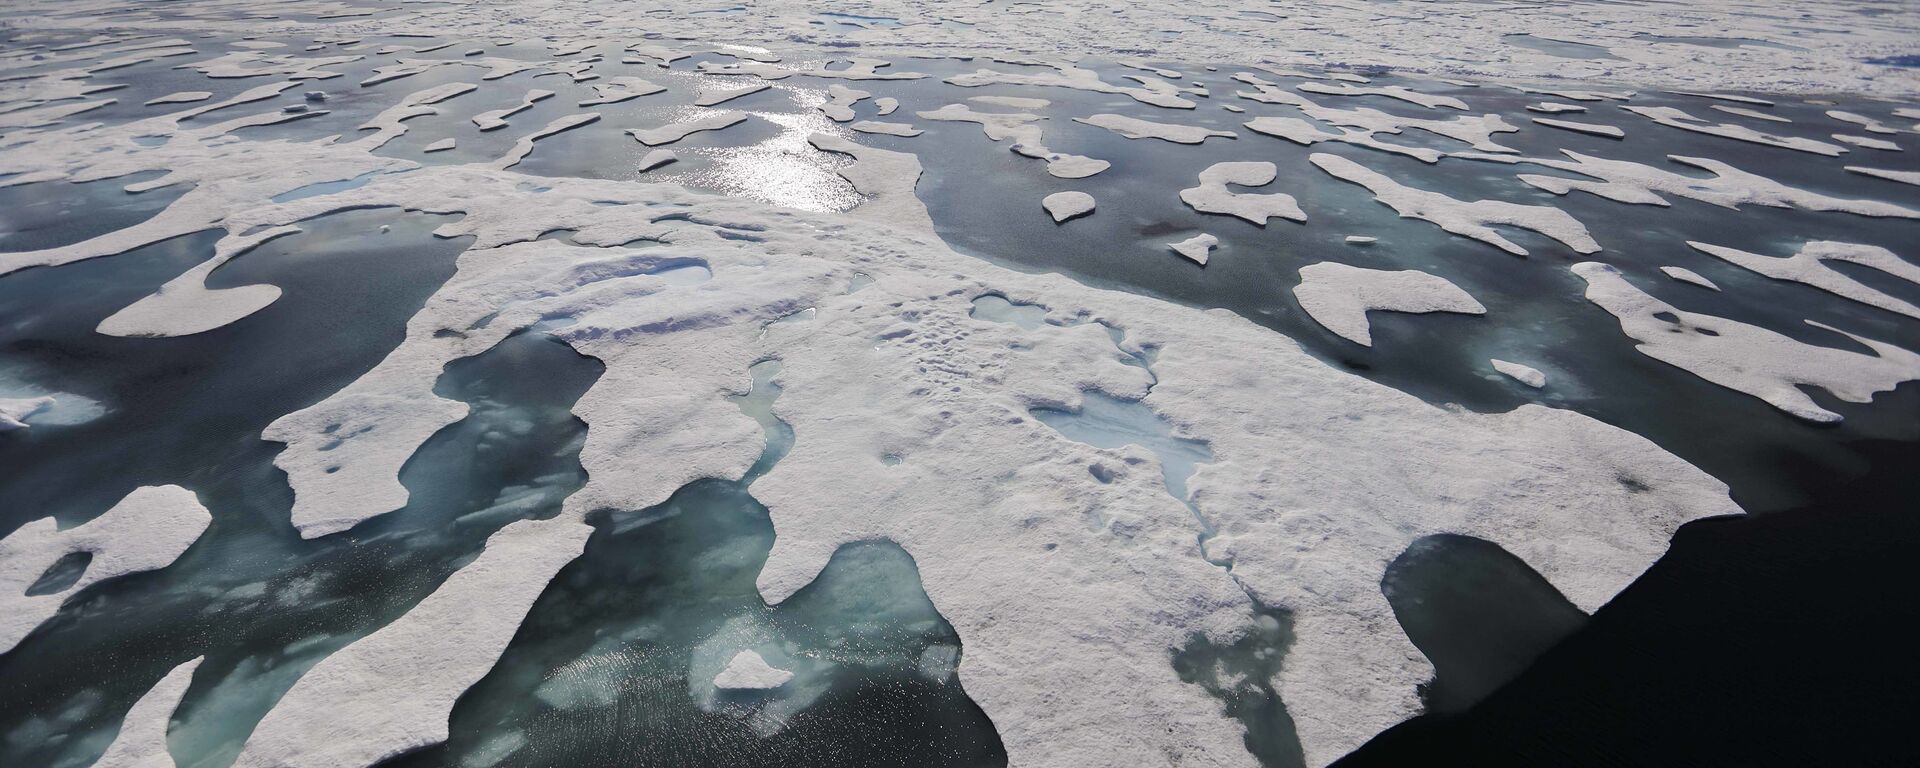 Sea ice melts on the Franklin Strait along the Northwest Passage in the Canadian Arctic Archipelago, Saturday, July 22, 2017. Because of climate change, more sea ice is being lost each summer than is being replenished in winters. Less sea ice coverage also means that less sunlight will be reflected off the surface of the ocean in a process known as the albedo effect. The oceans will absorb more heat, further fueling global warming - Sputnik International, 1920, 20.07.2022